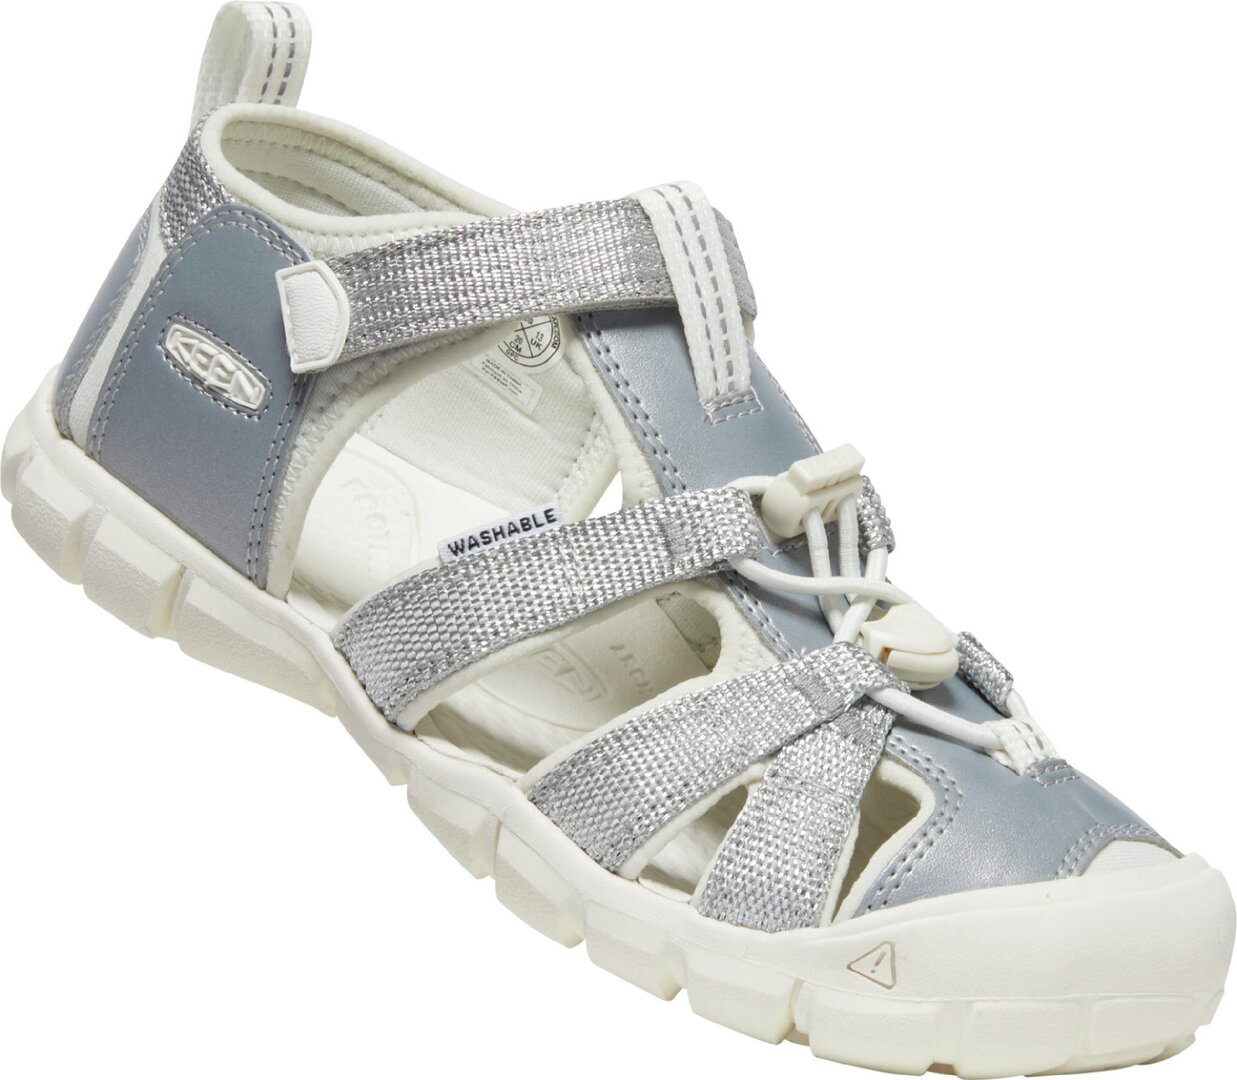 Sandály Keen SEACAMP II CNX YOUTH silver/star white US 3